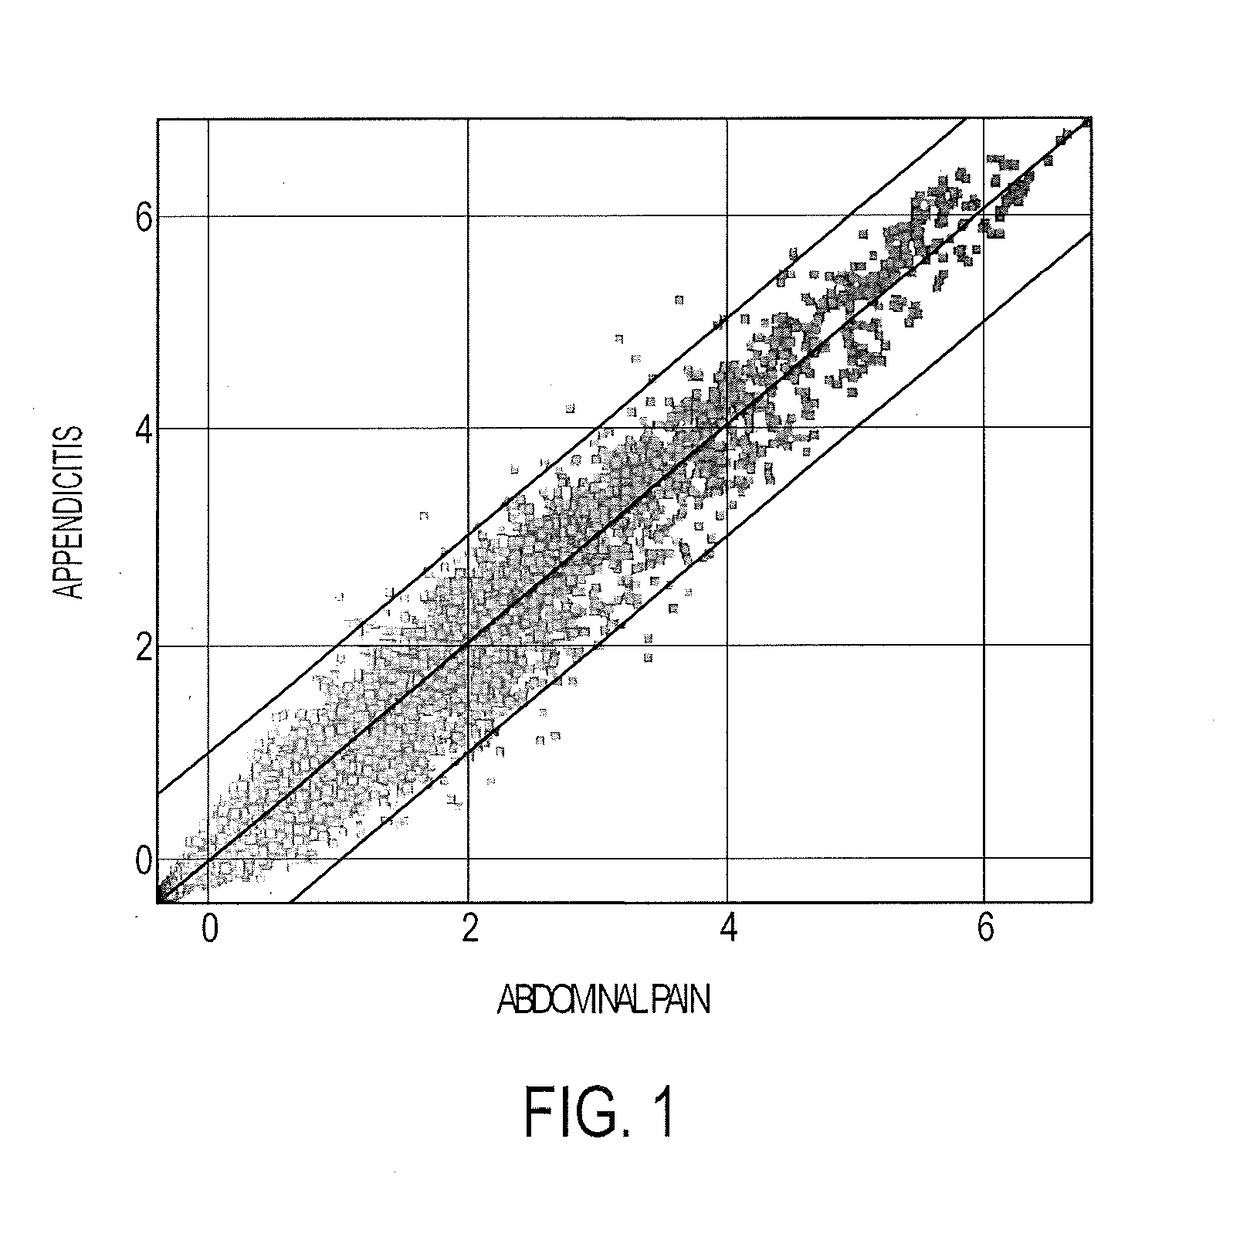 Blood biomarkers for appendicitis and diagnostics methods using biomarkers